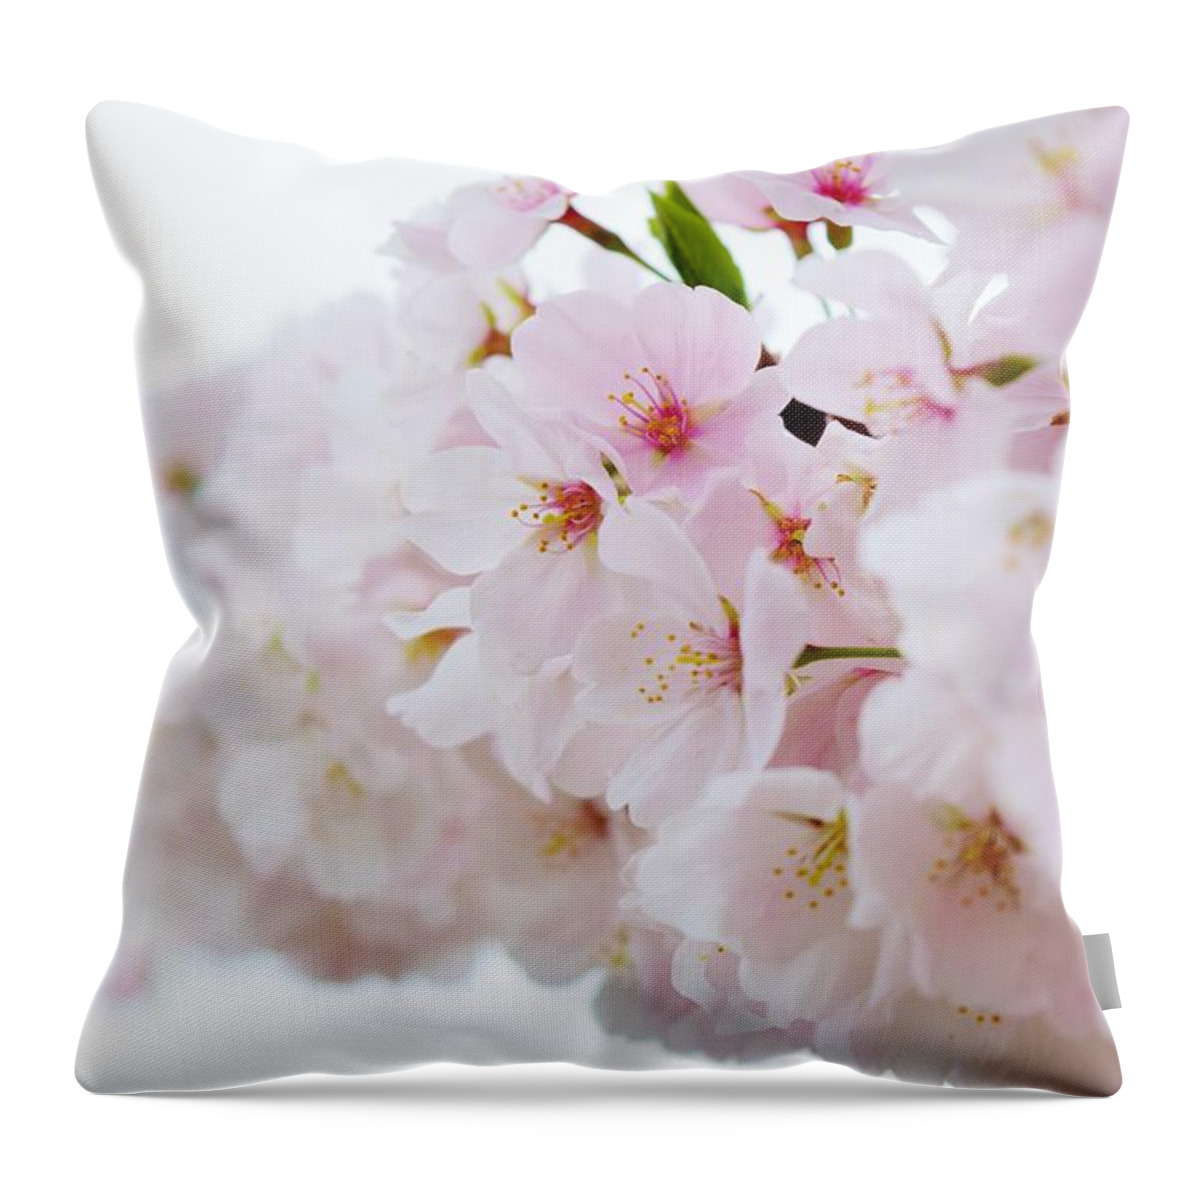 Cherry Blossom Throw Pillow featuring the photograph Cherry Blossom Focus by Nicole Lloyd